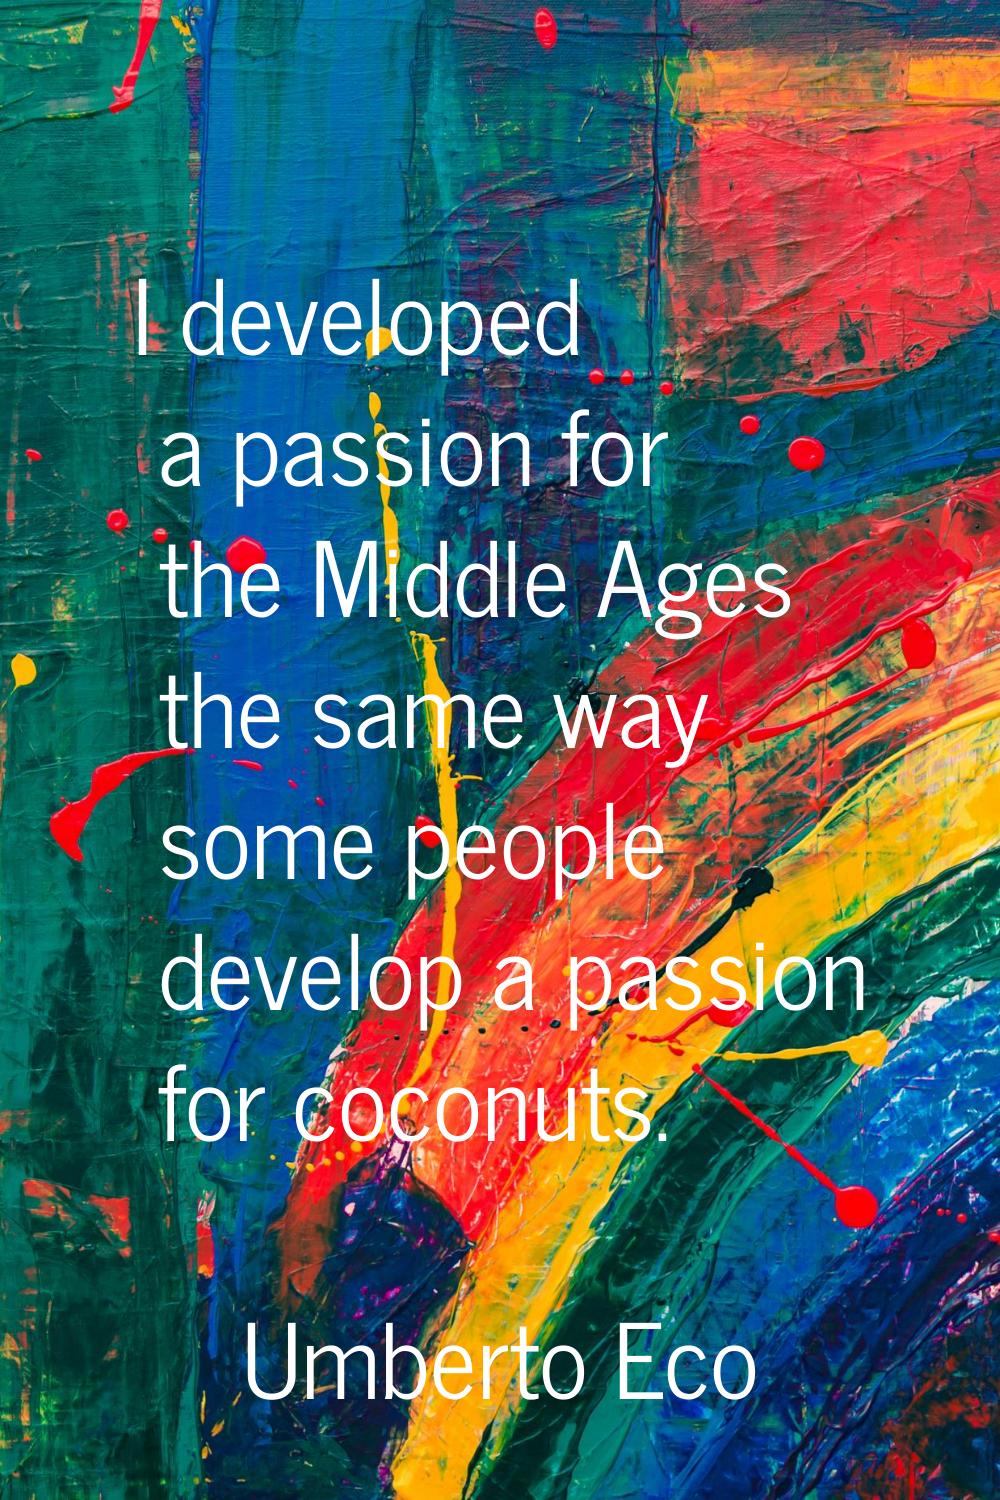 I developed a passion for the Middle Ages the same way some people develop a passion for coconuts.